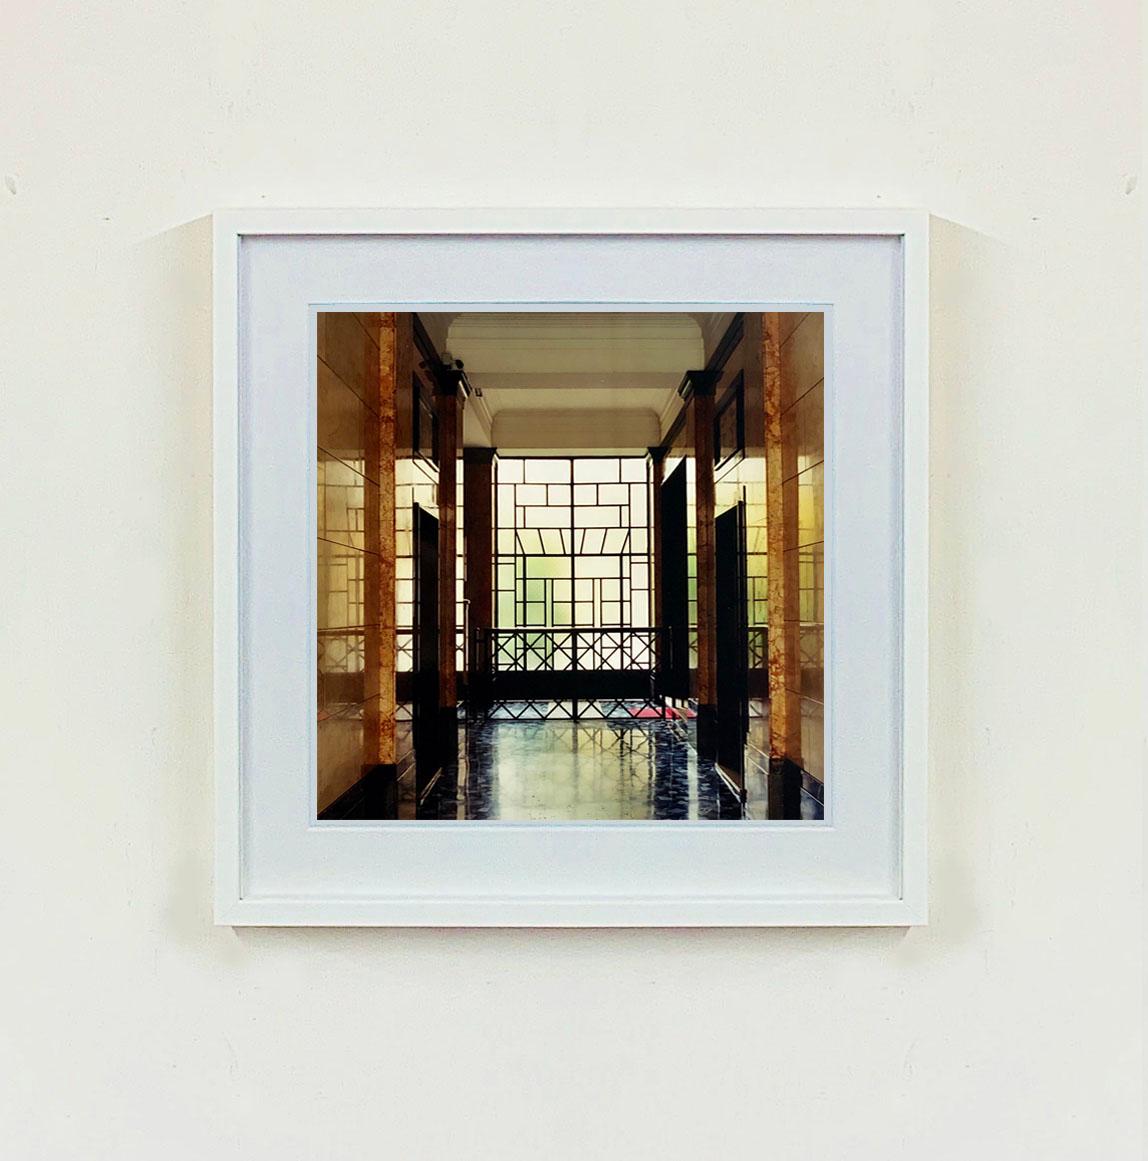 Italian Photography Trio - Set of Three Square Framed Color Photographs of Milan - Contemporary Print by Richard Heeps